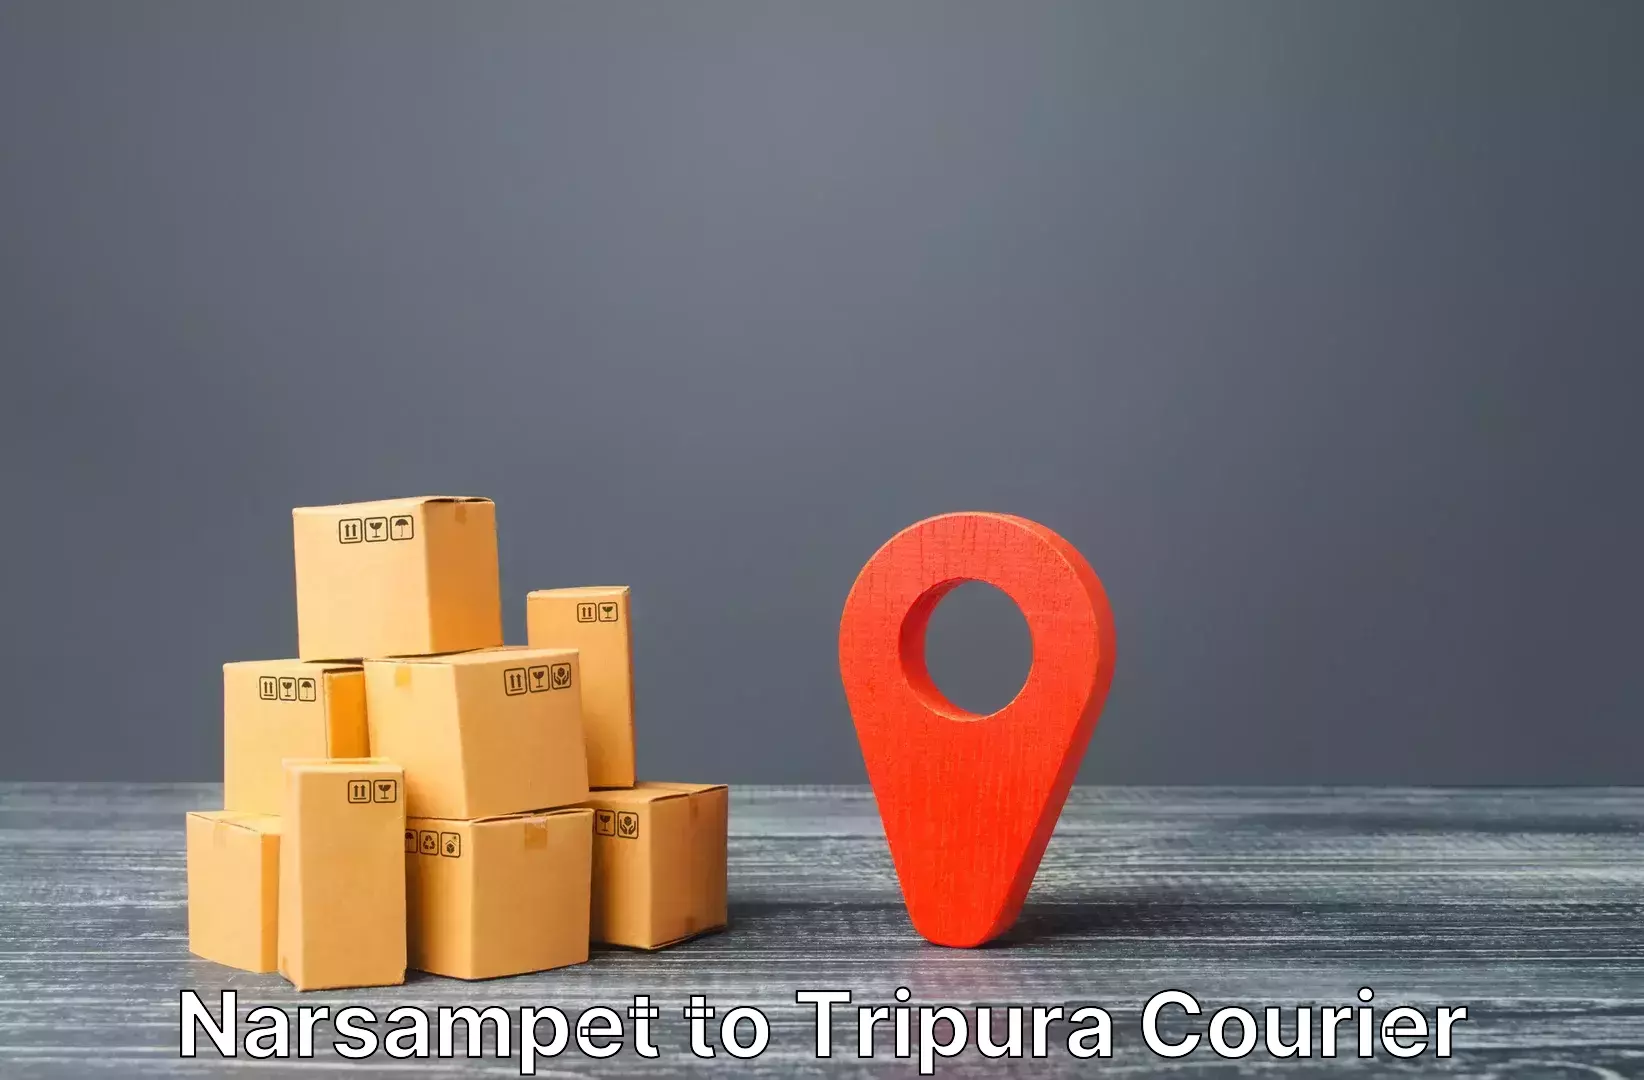 Efficient luggage delivery in Narsampet to Tripura